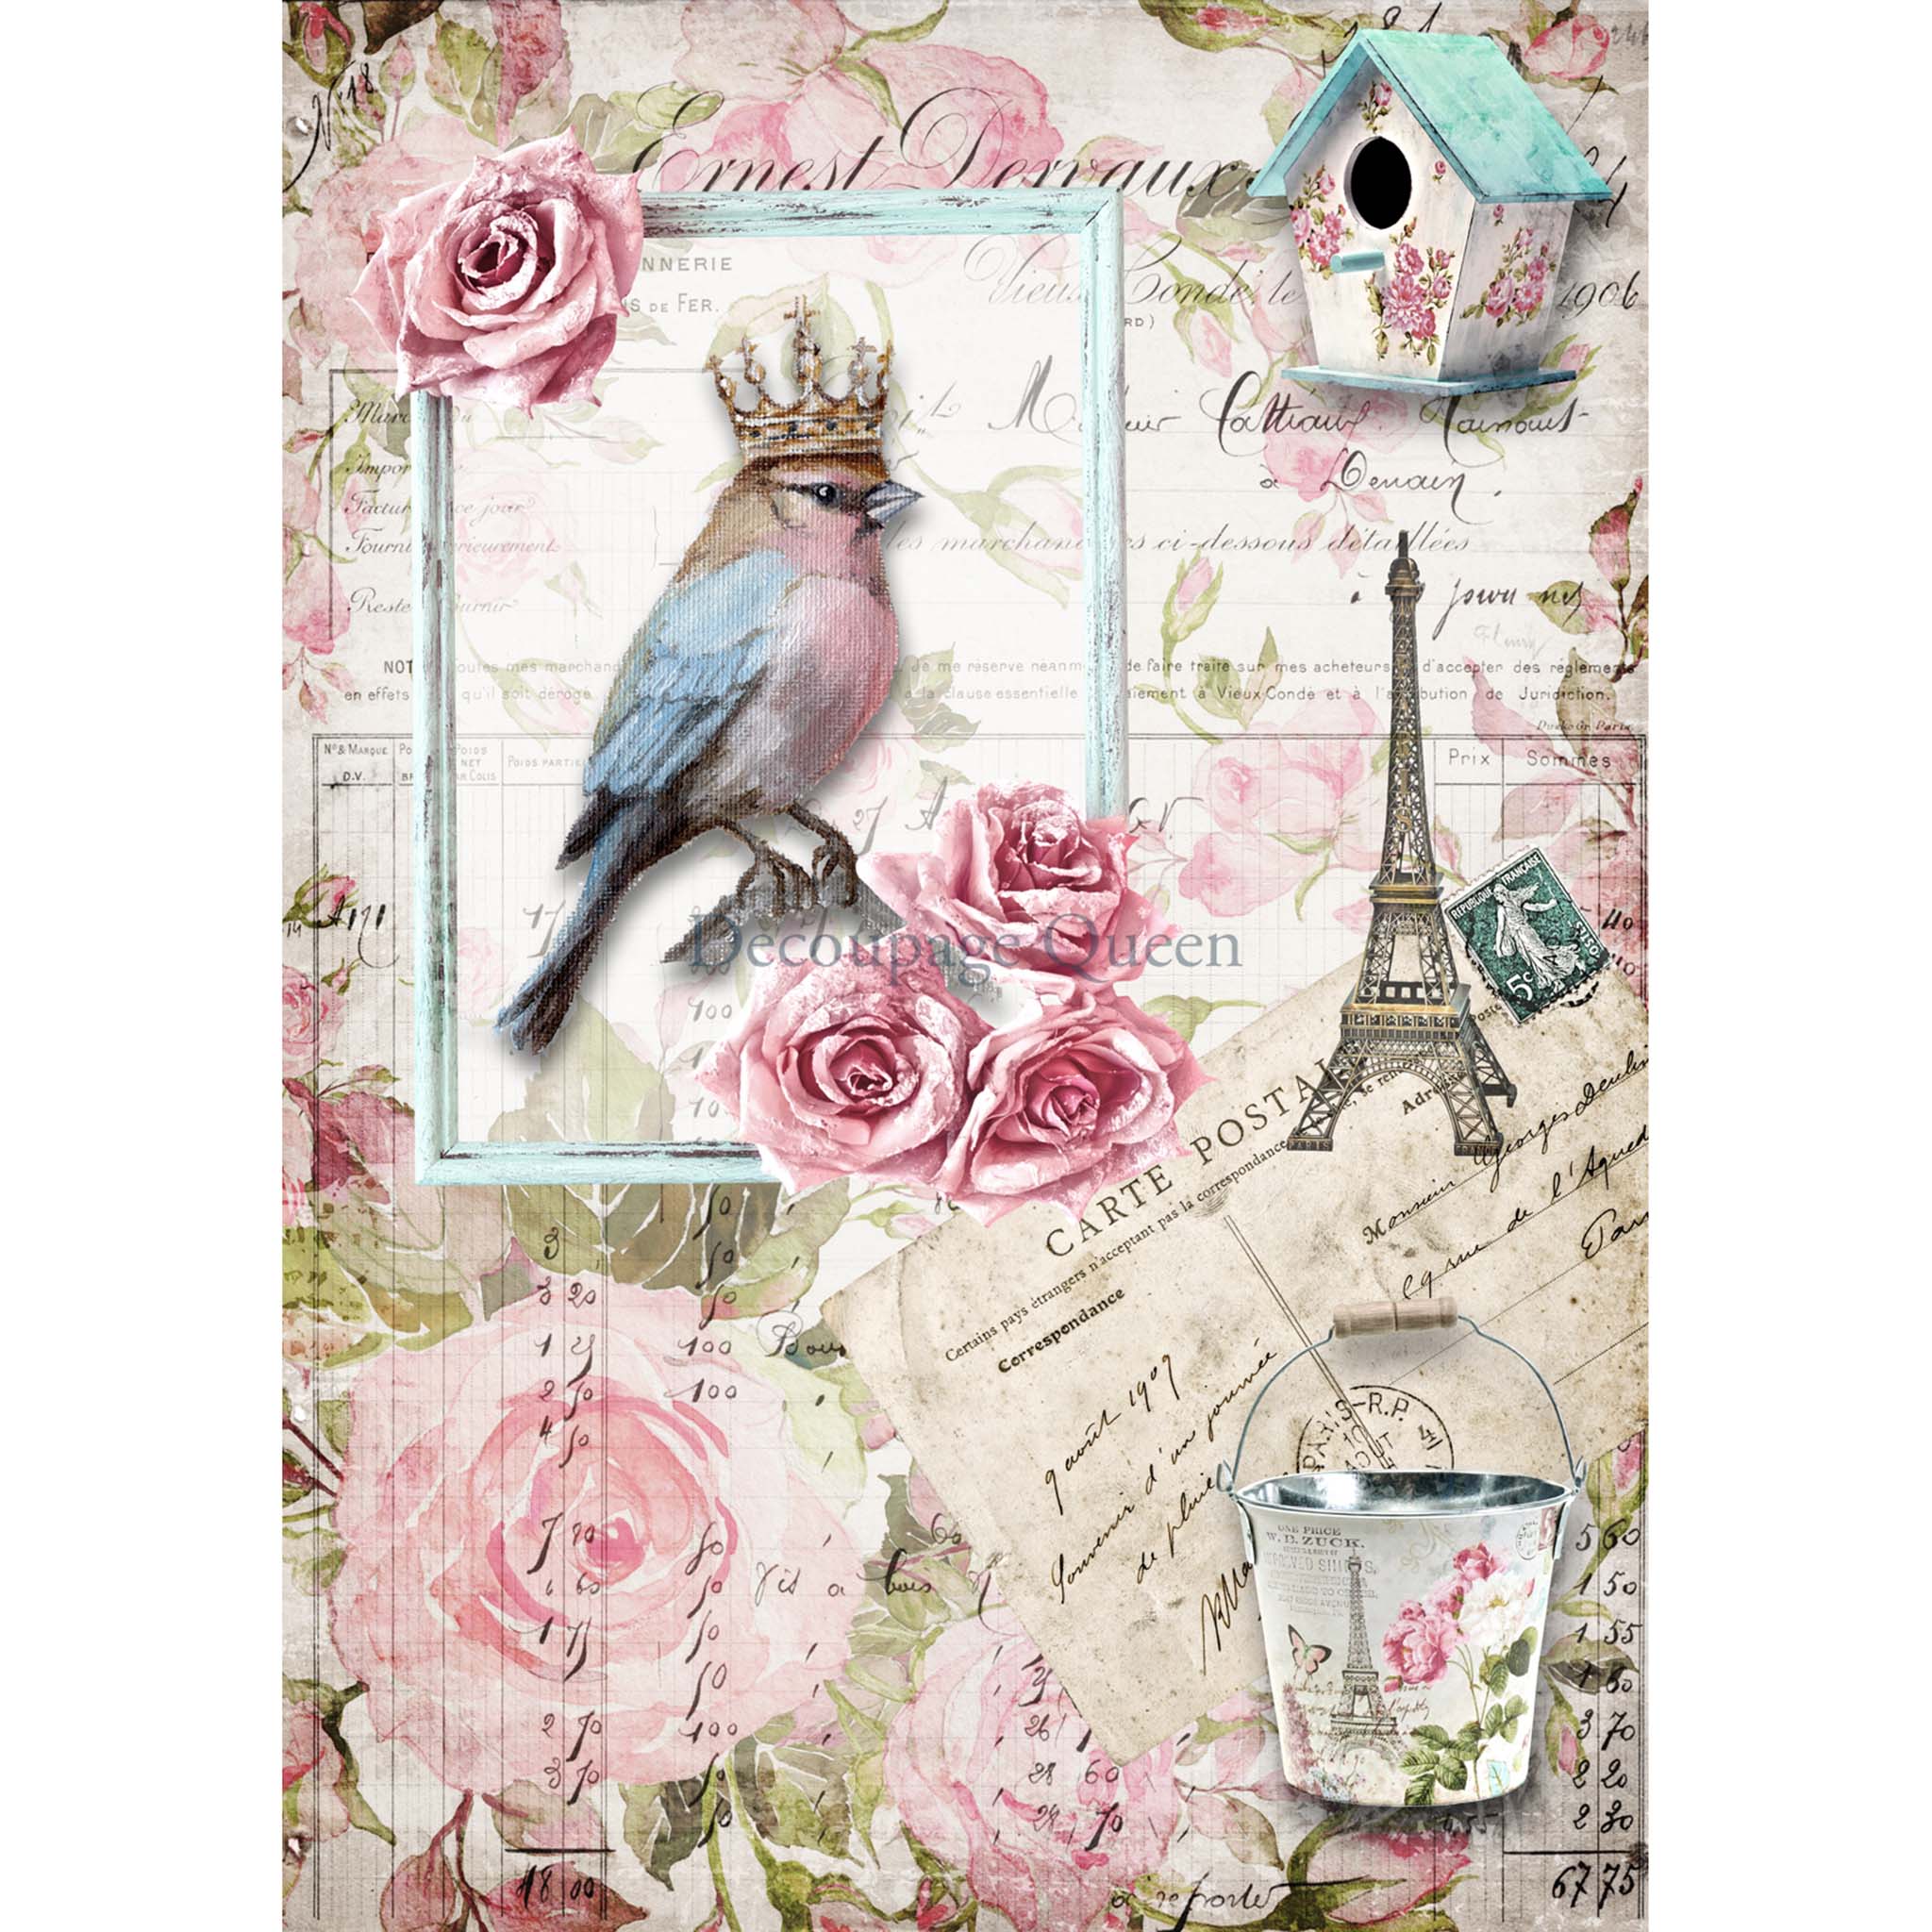 A2 rice paper design that features a small bird wearing a crown perched in a picture frame, surrounded by iconic Parisian elements like the Eiffel Tower, a birdhouse, and a French postcard against a floral background. White borders are on the sides.